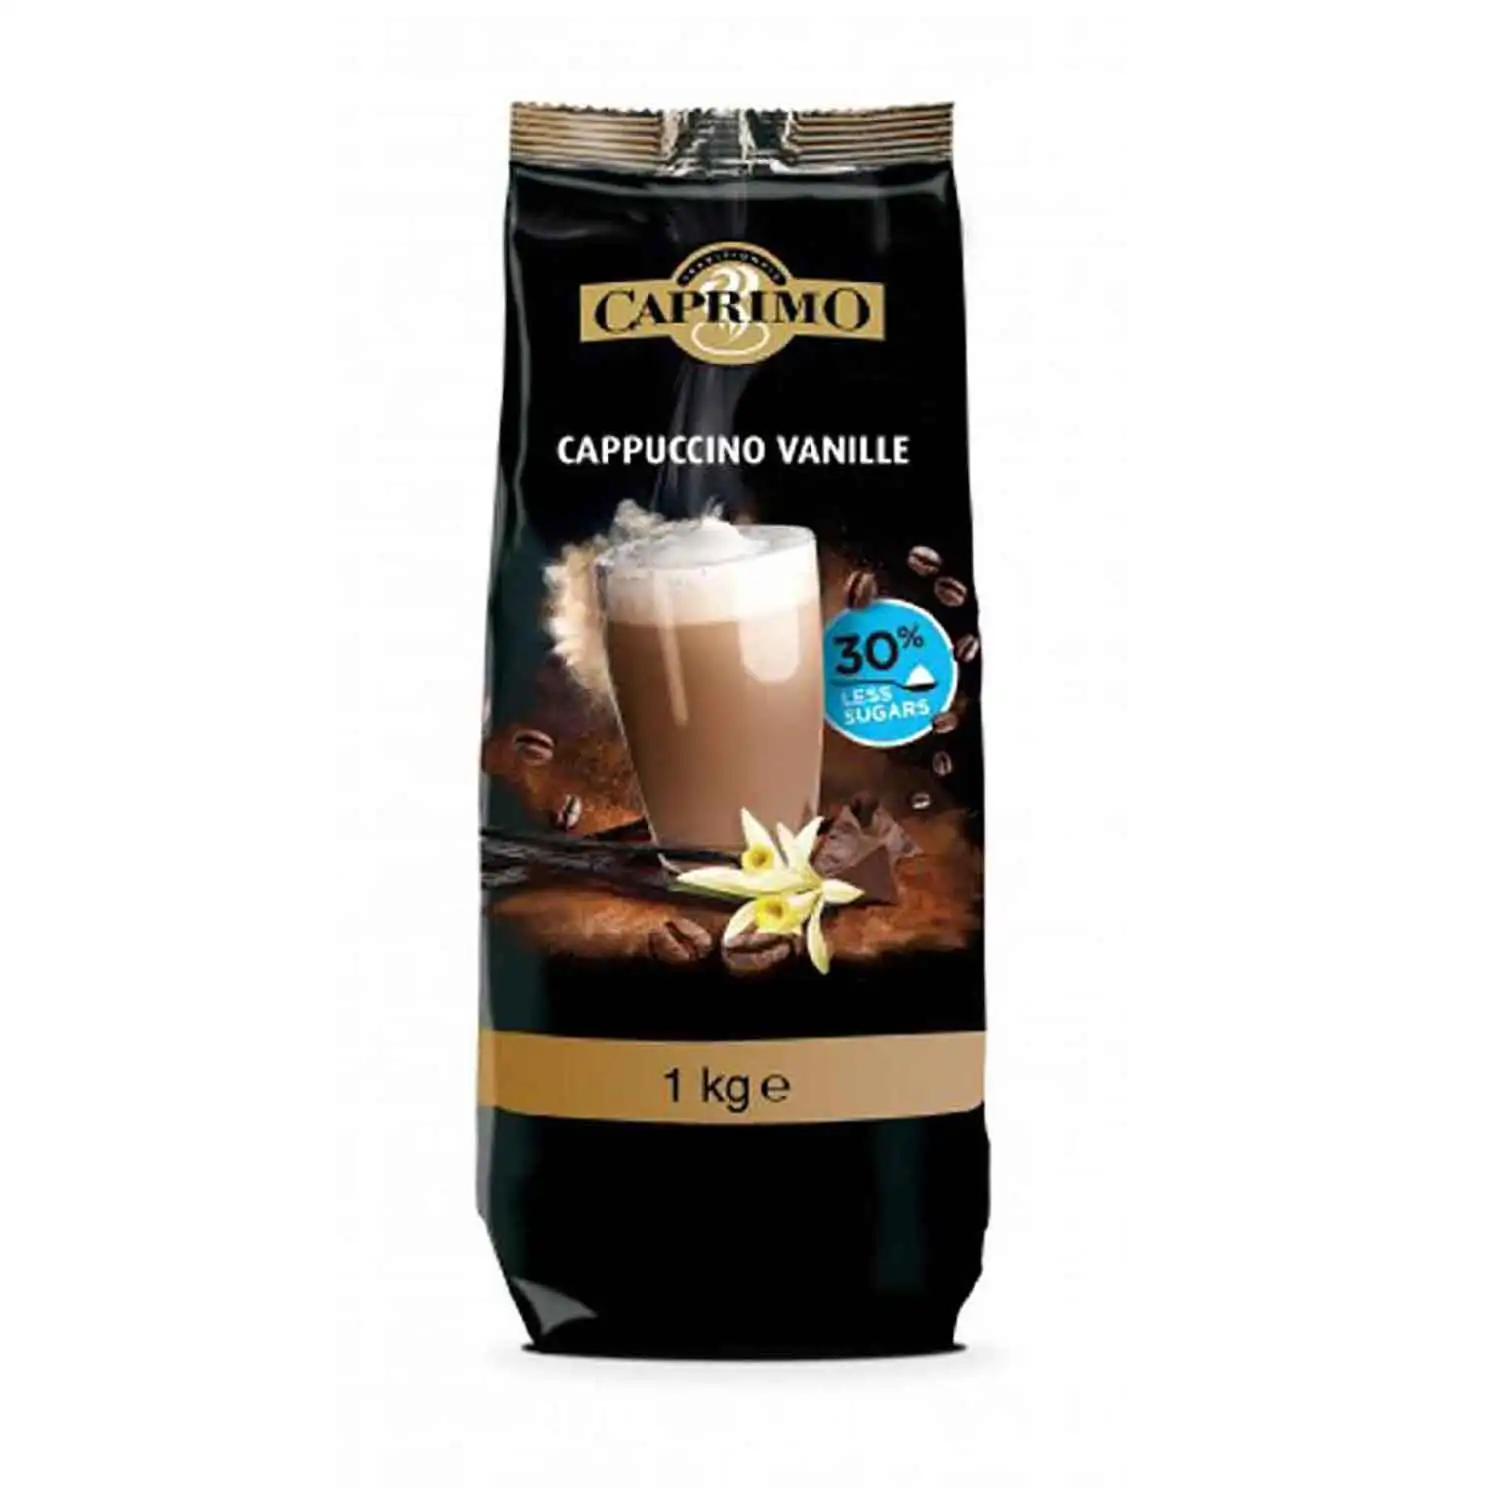 Caprimo cappuccino van. moins sucre 1kg - Buy at Real Tobacco